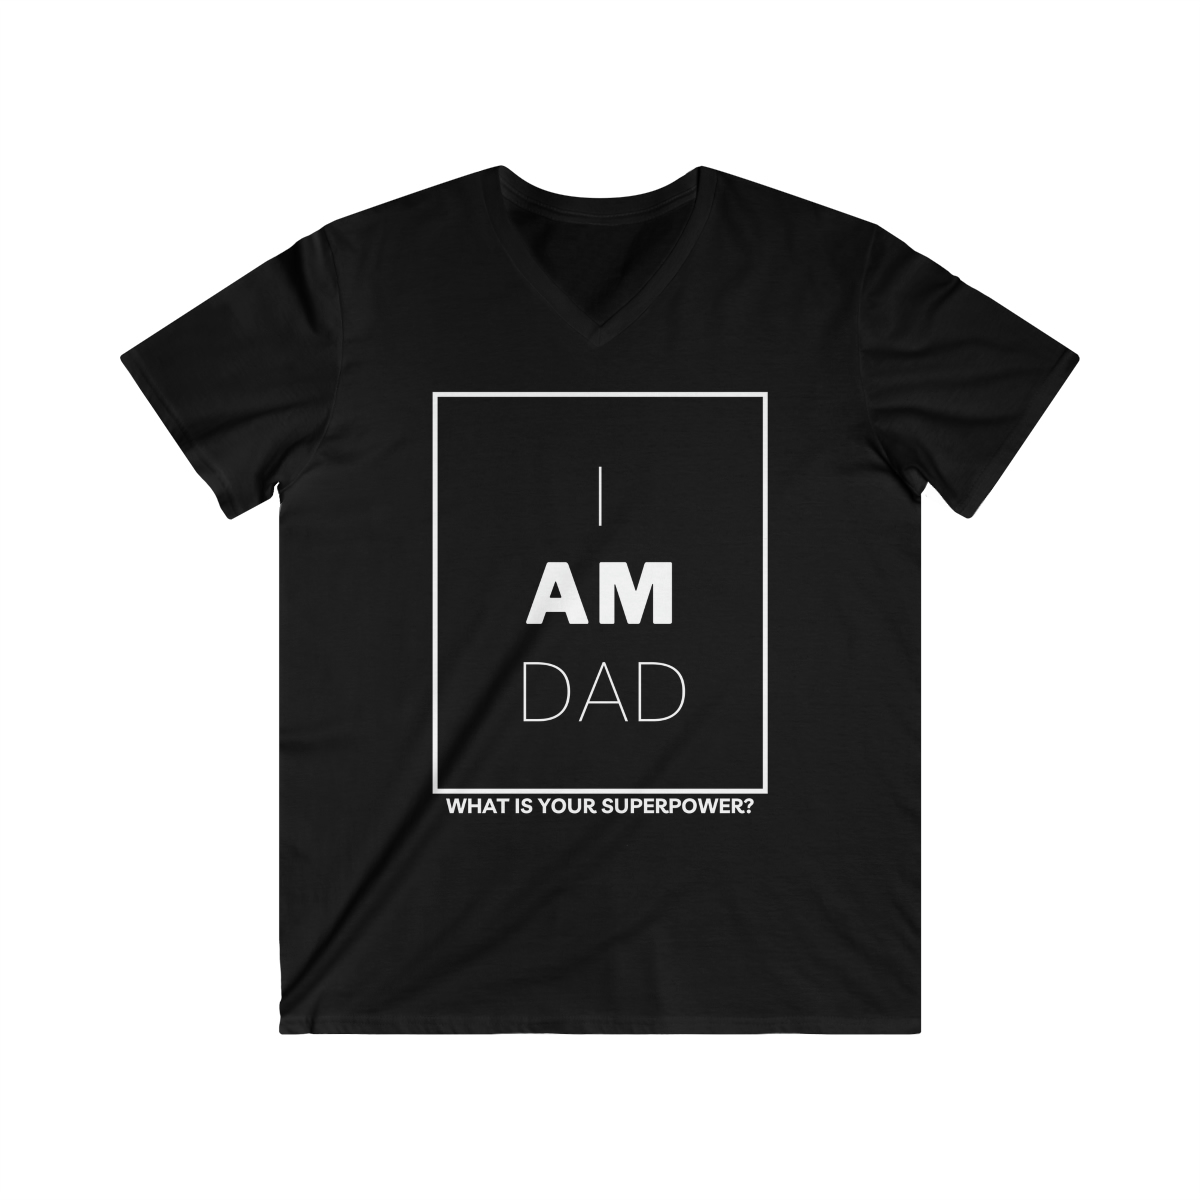 “I am dad, what is your superpower?” T-shirt